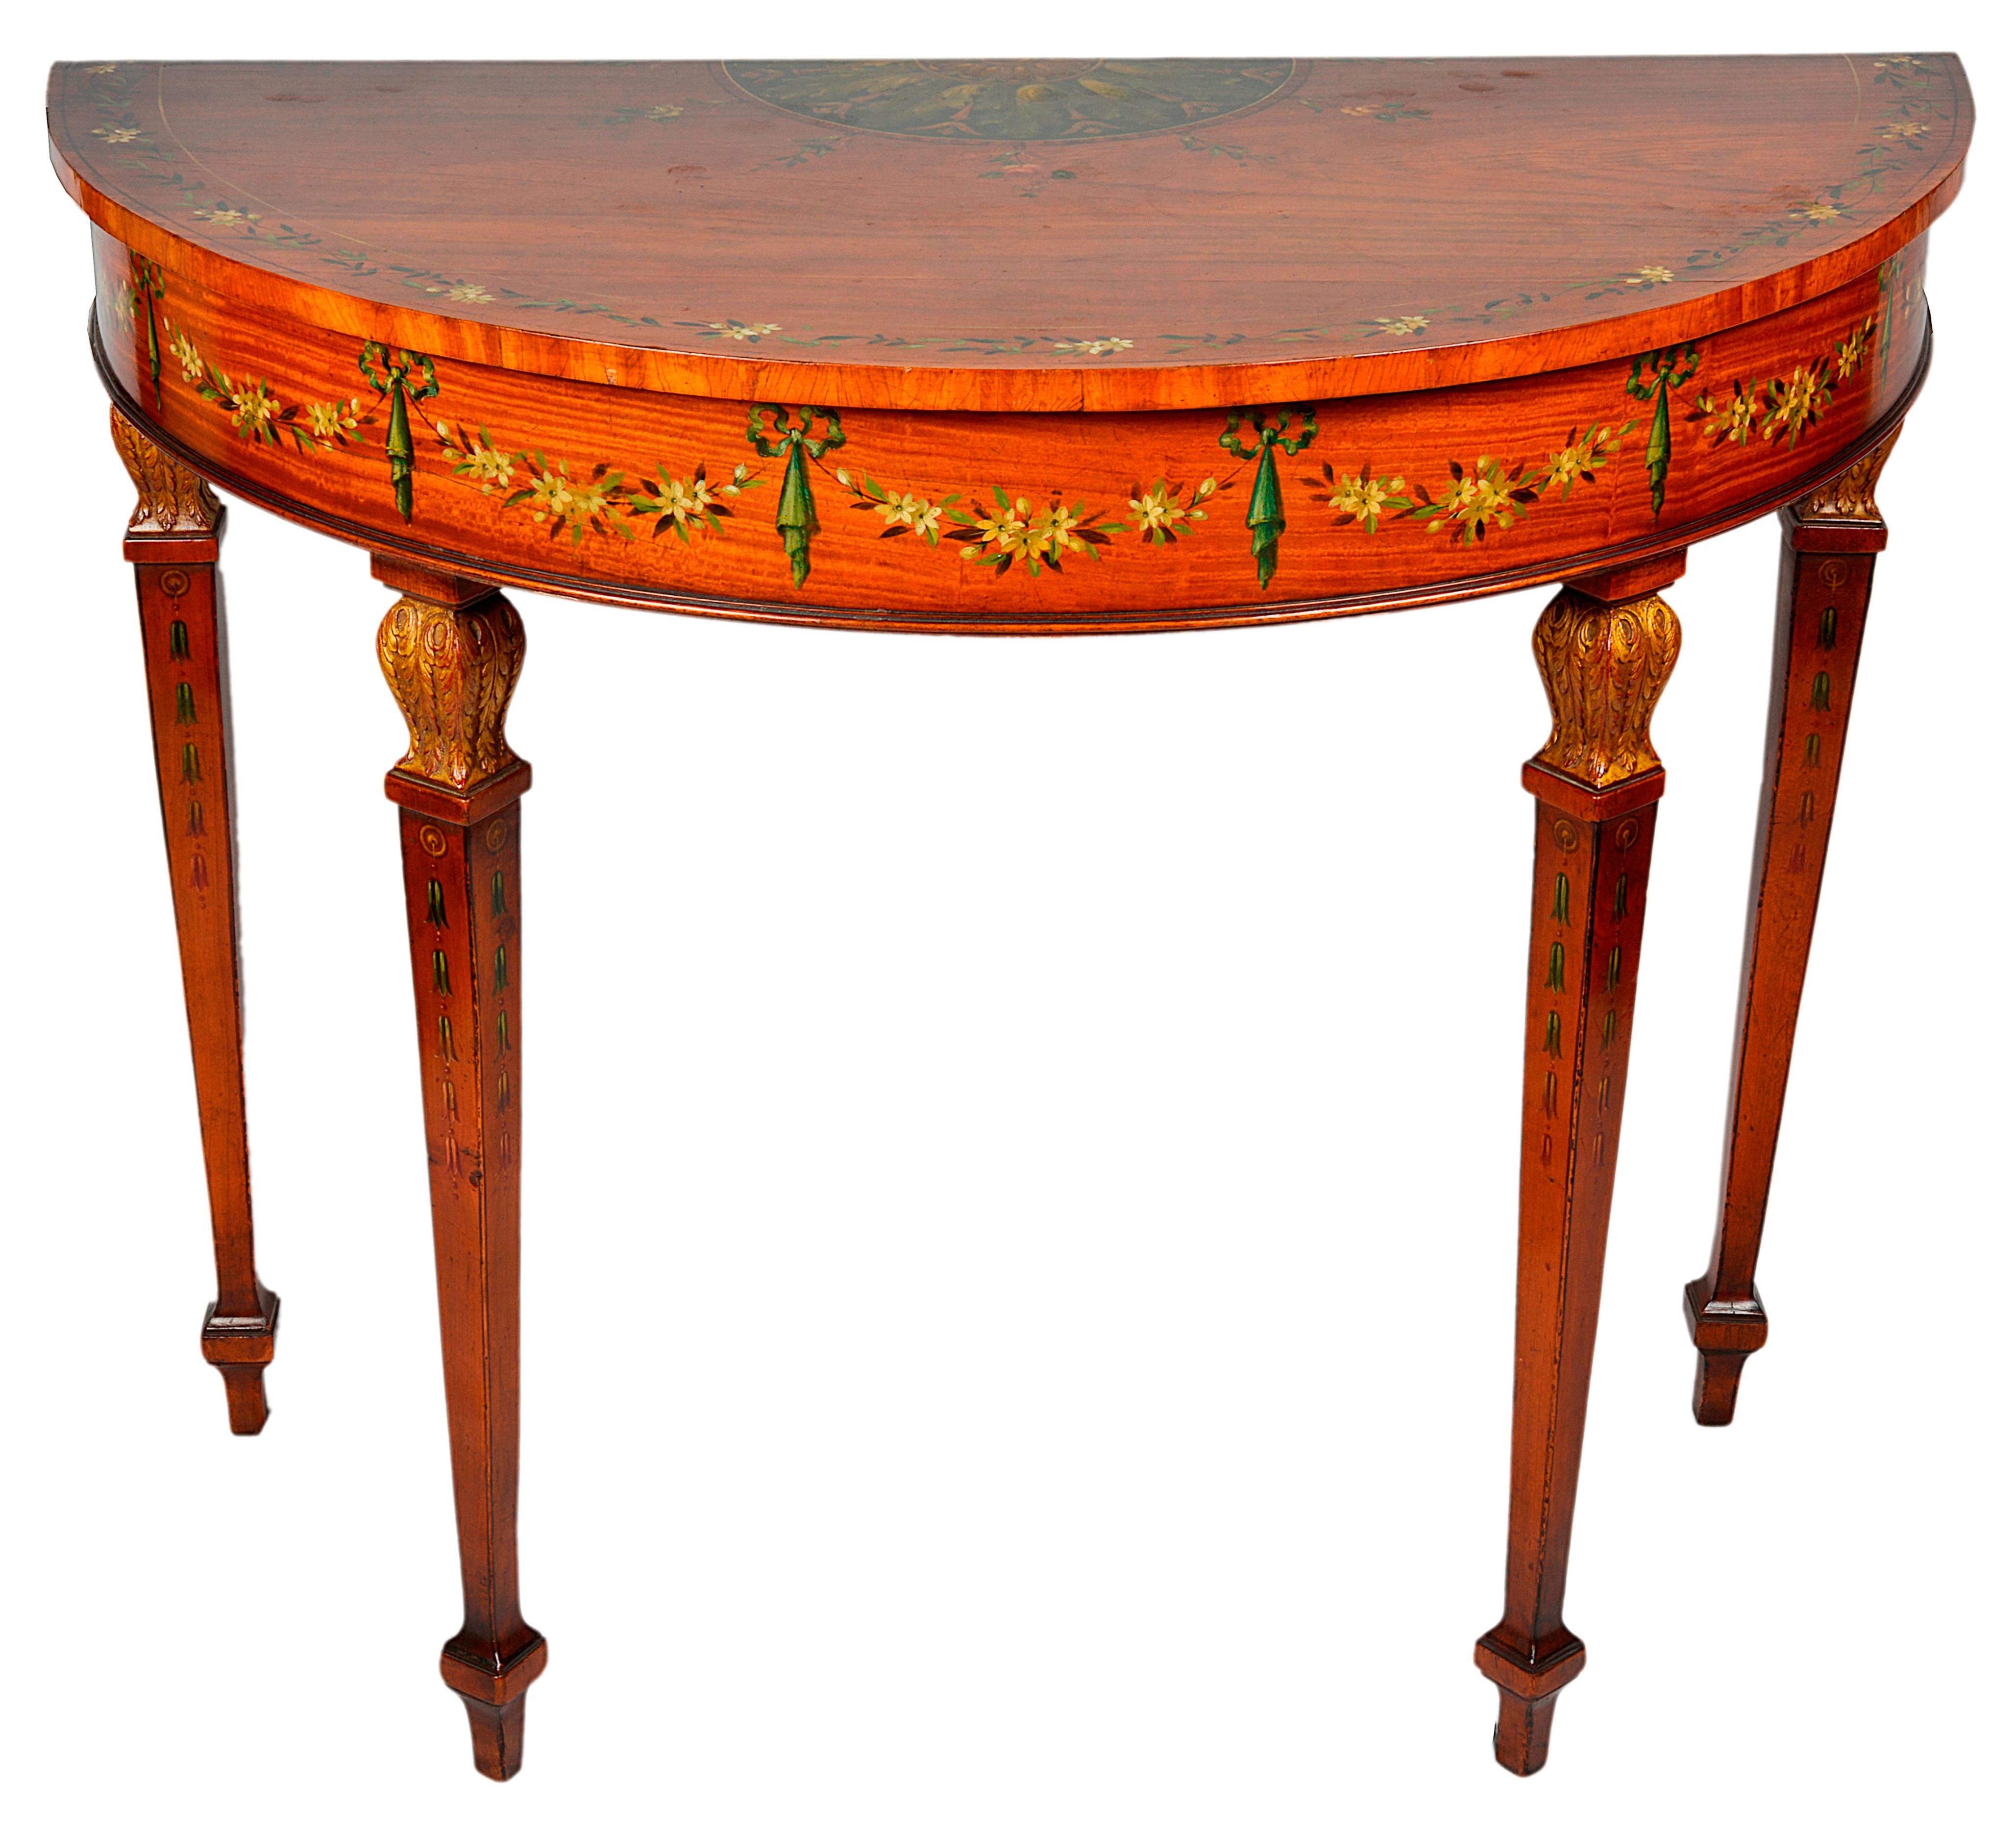 A good quality pair of Edwardian period Sheraton Revival satinwood console tables, each having classical painted decoration and raised on square tapering legs.